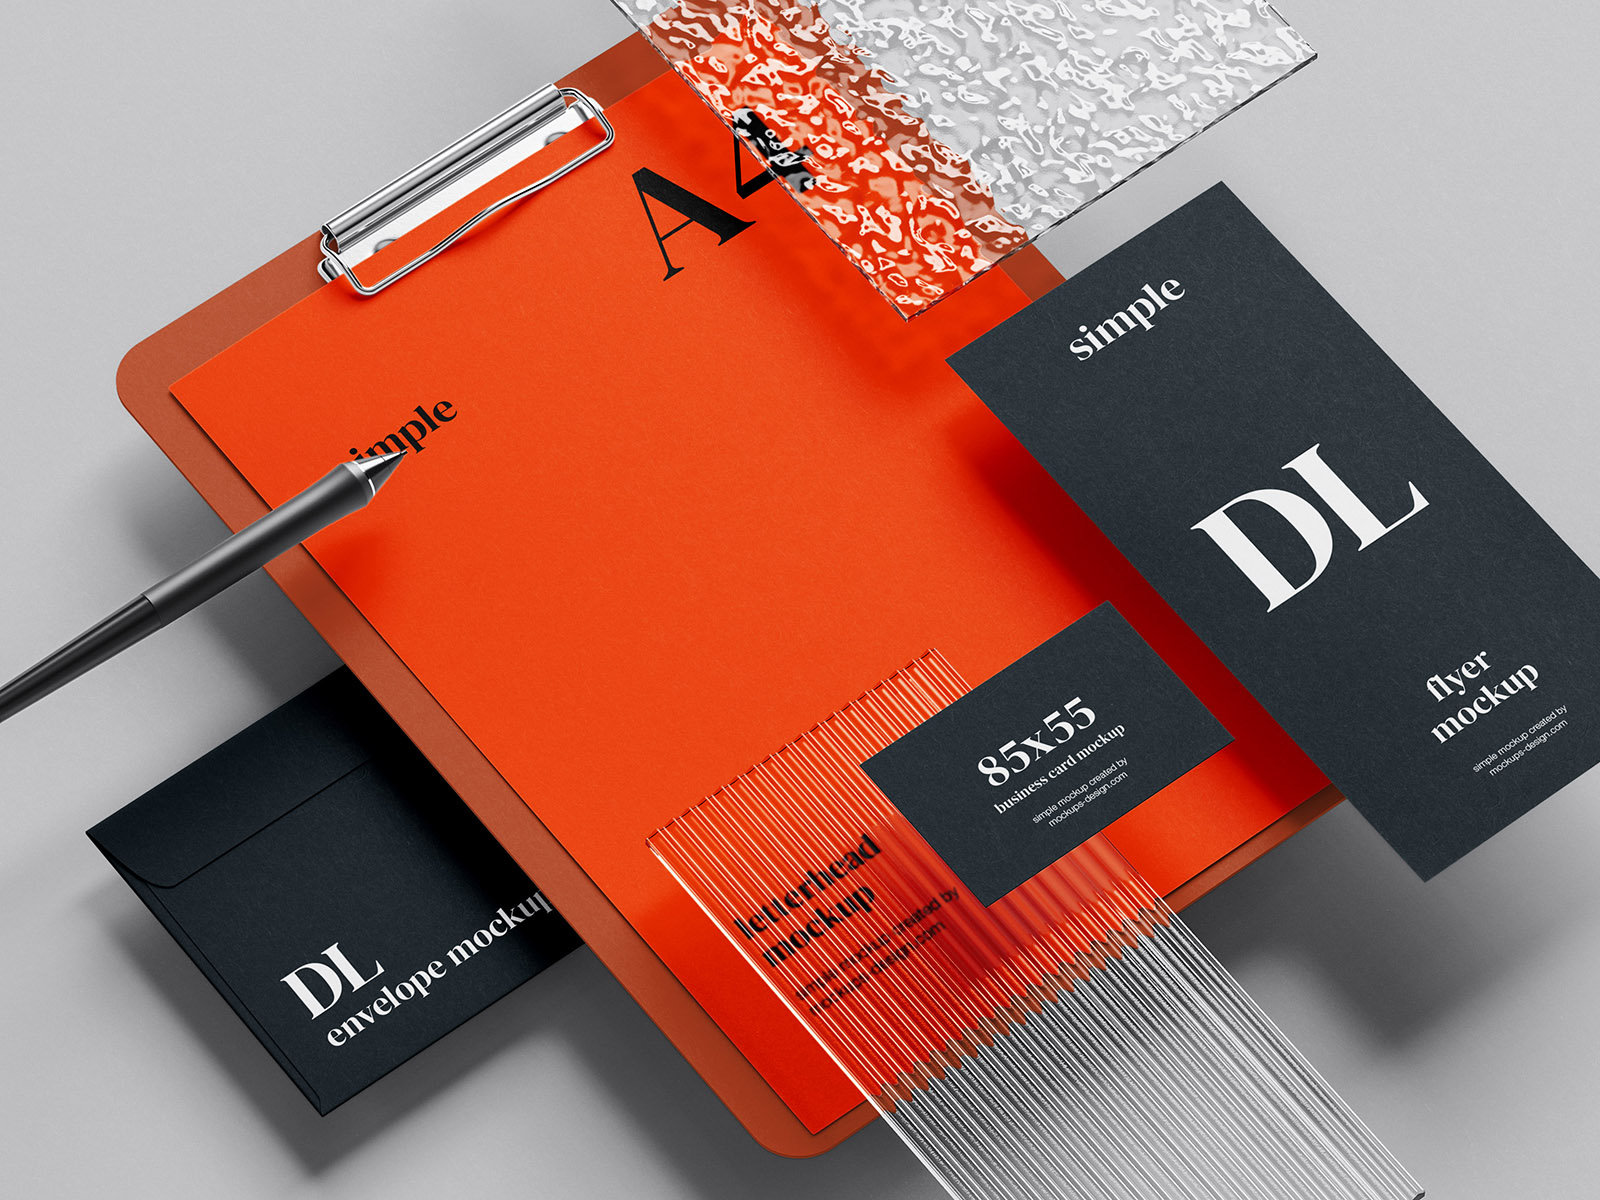 Top and Perspective View of 5 Branding Stationery Mockups FREE PSD